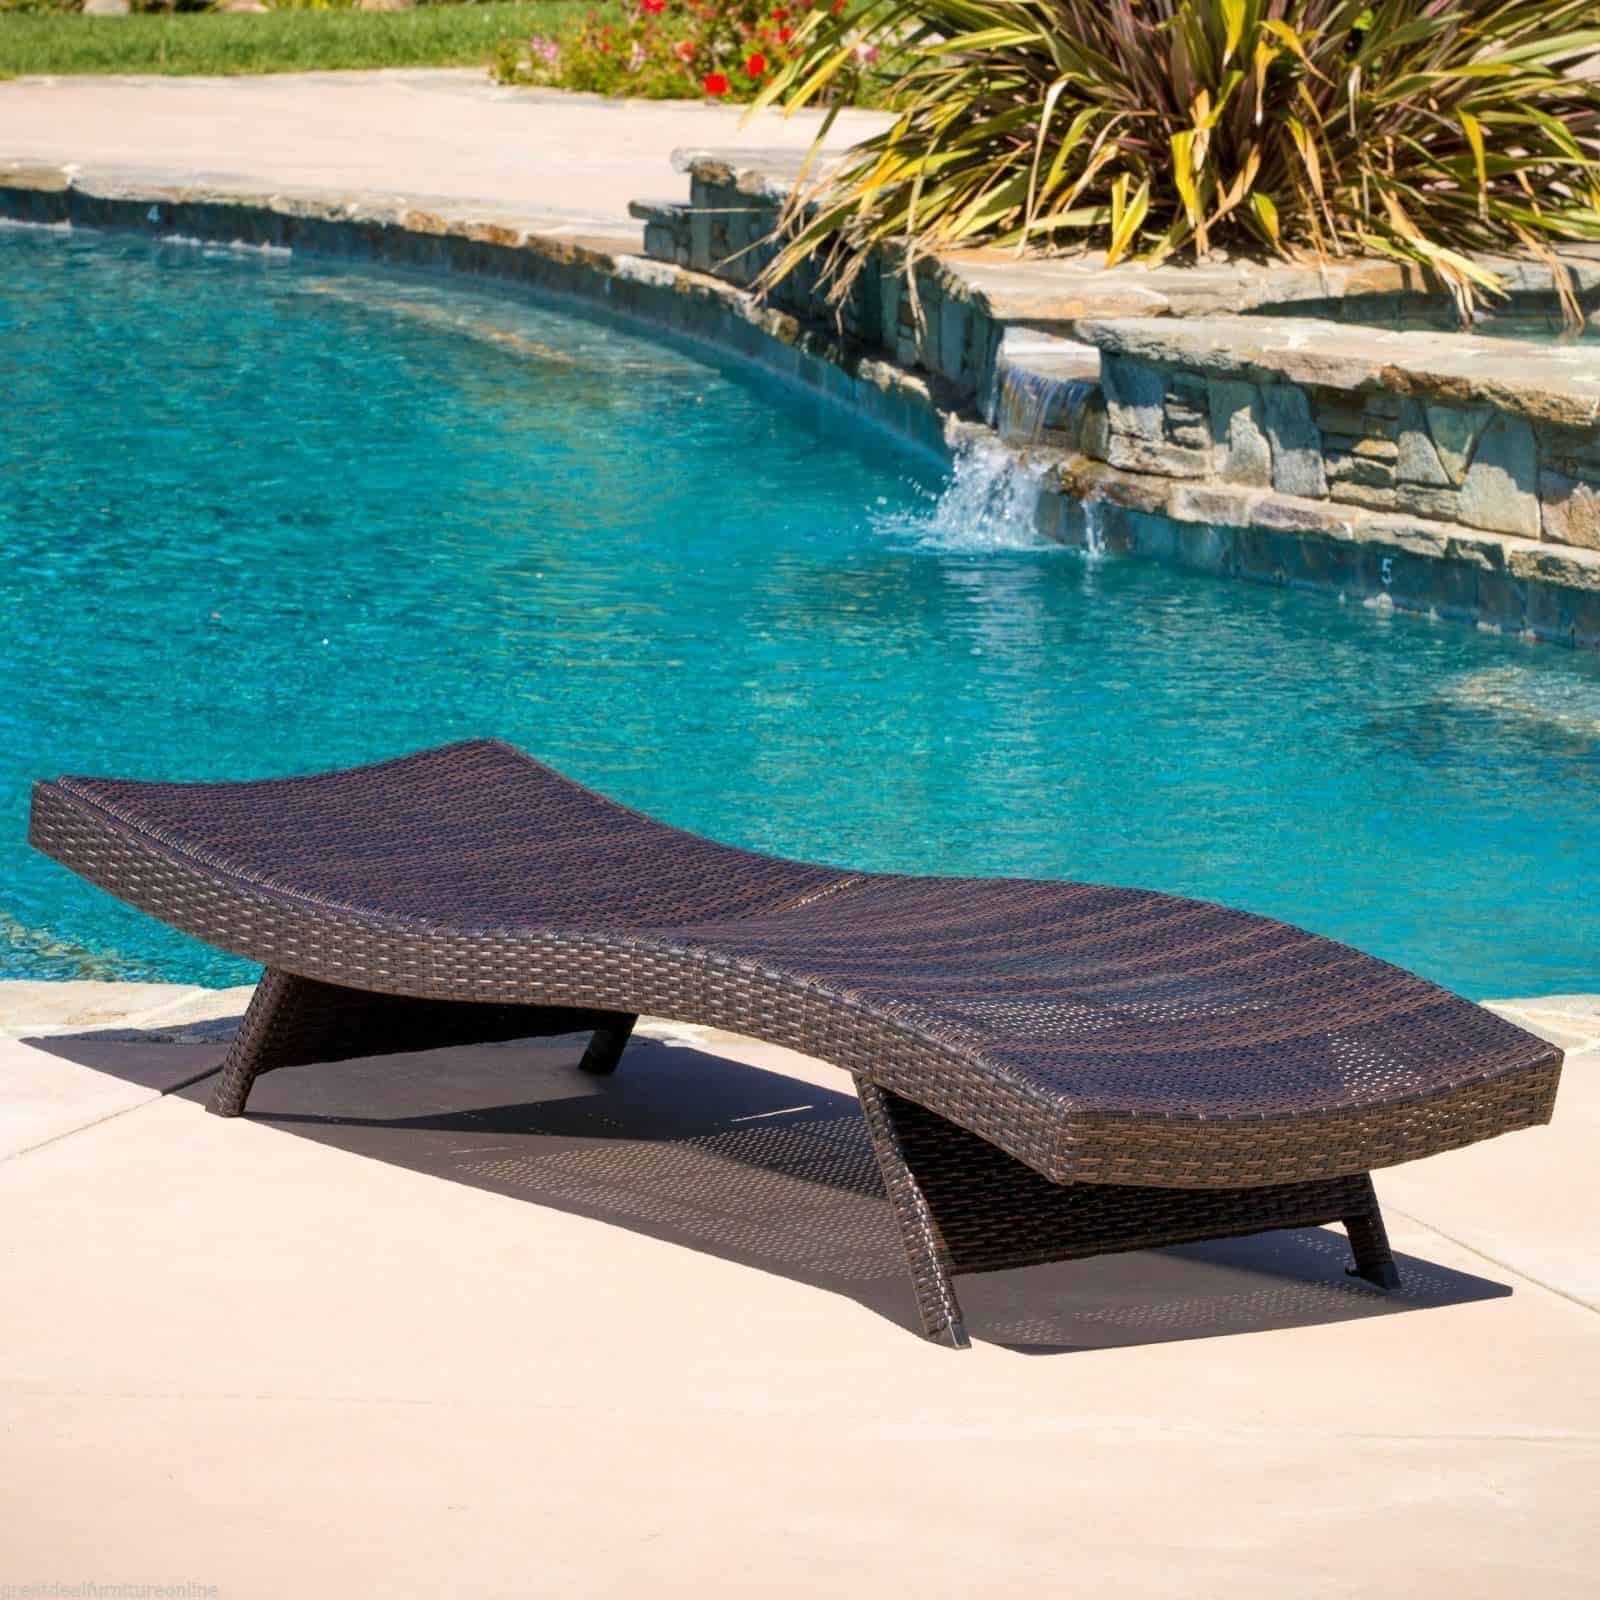 A wicker chaise lounge in front of a pool.